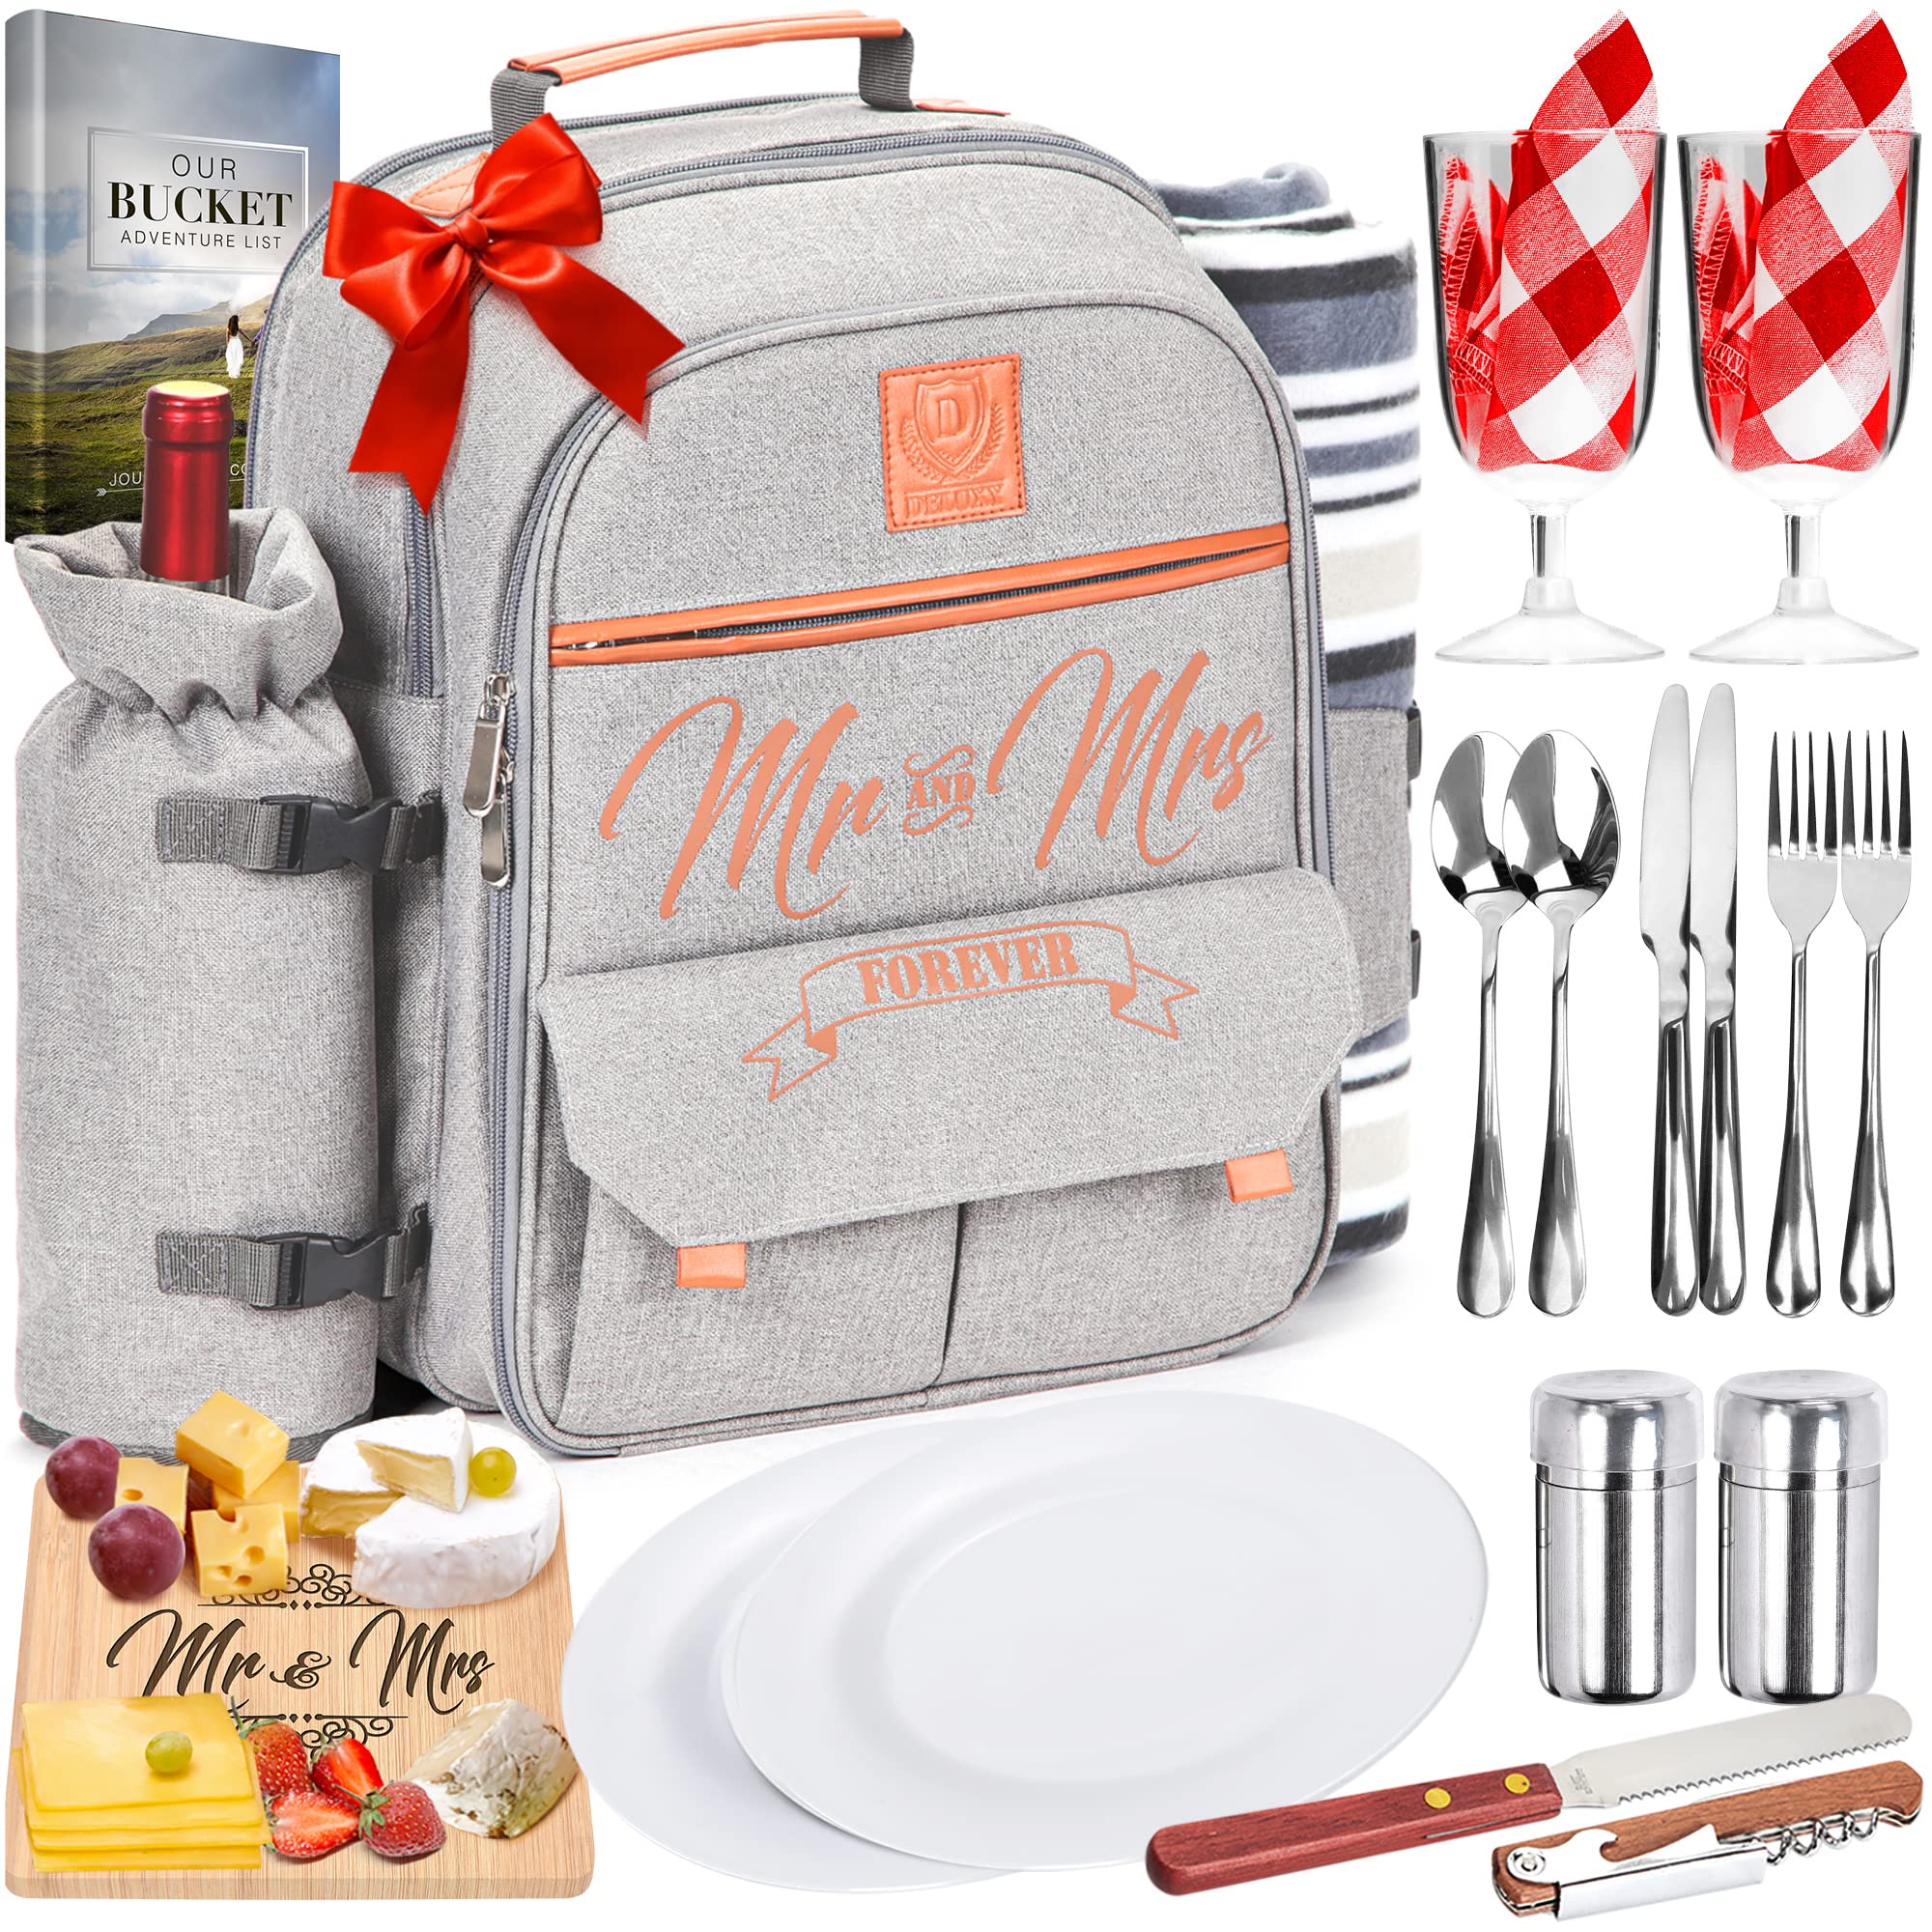 DELUXY Mr & Mrs Picnic Backpack- Wedding Gifts For Couple 2021, Cute Bridal Shower Gifts For Bride, Mr and Mrs Gifts, Couples Gifts, Engagement Gifts For Couples Newly Engaged Unique, Anniversary Gift - DELUXY